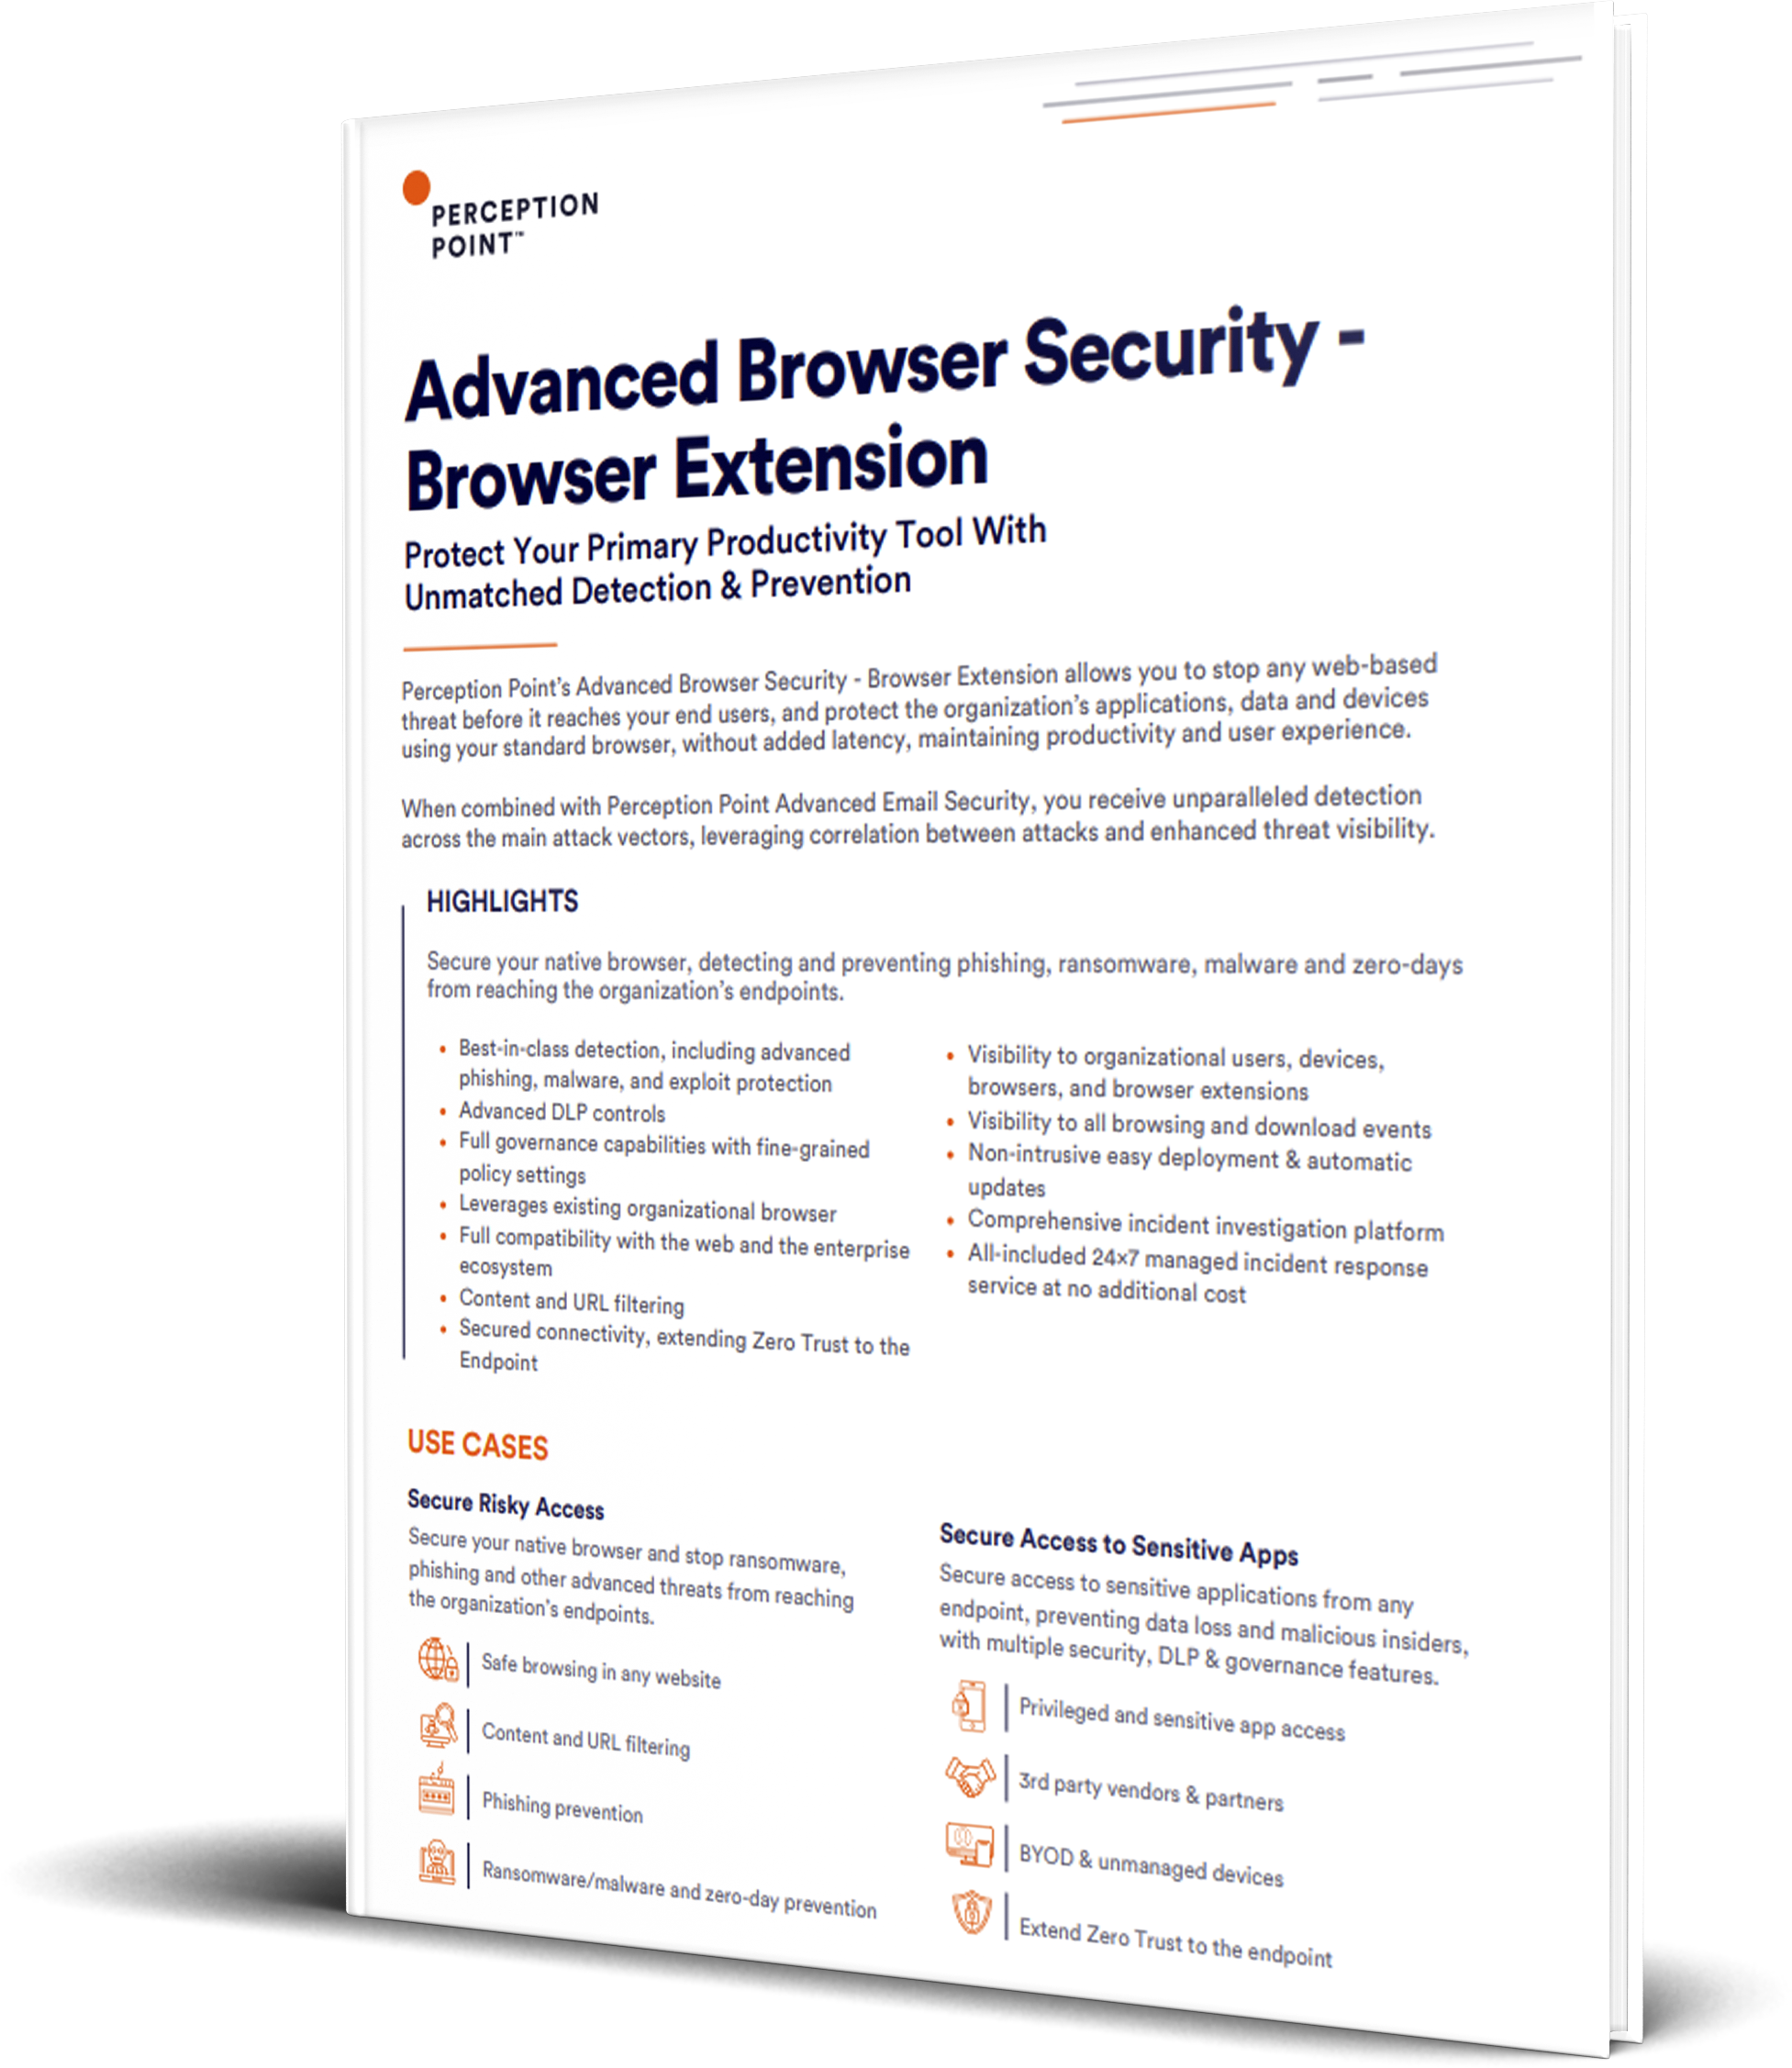 Advanced Browser Security: Browser Extension